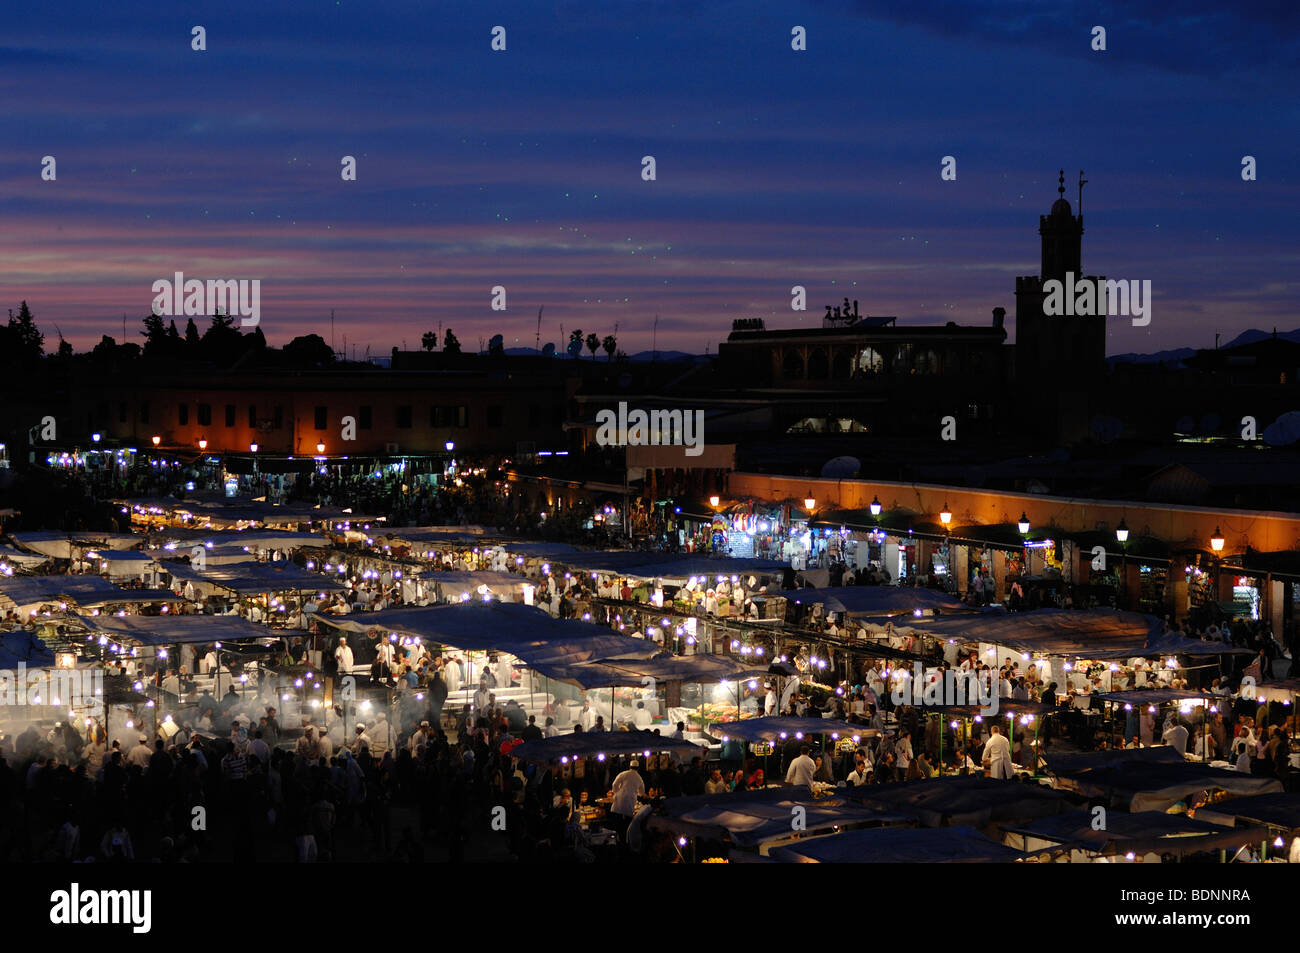 Lit Food Stalls on Djemaa El-Fna or Djemaa El Fna Square at Dusk, Evening or Early Night, Marrakesh, Morocco Stock Photo